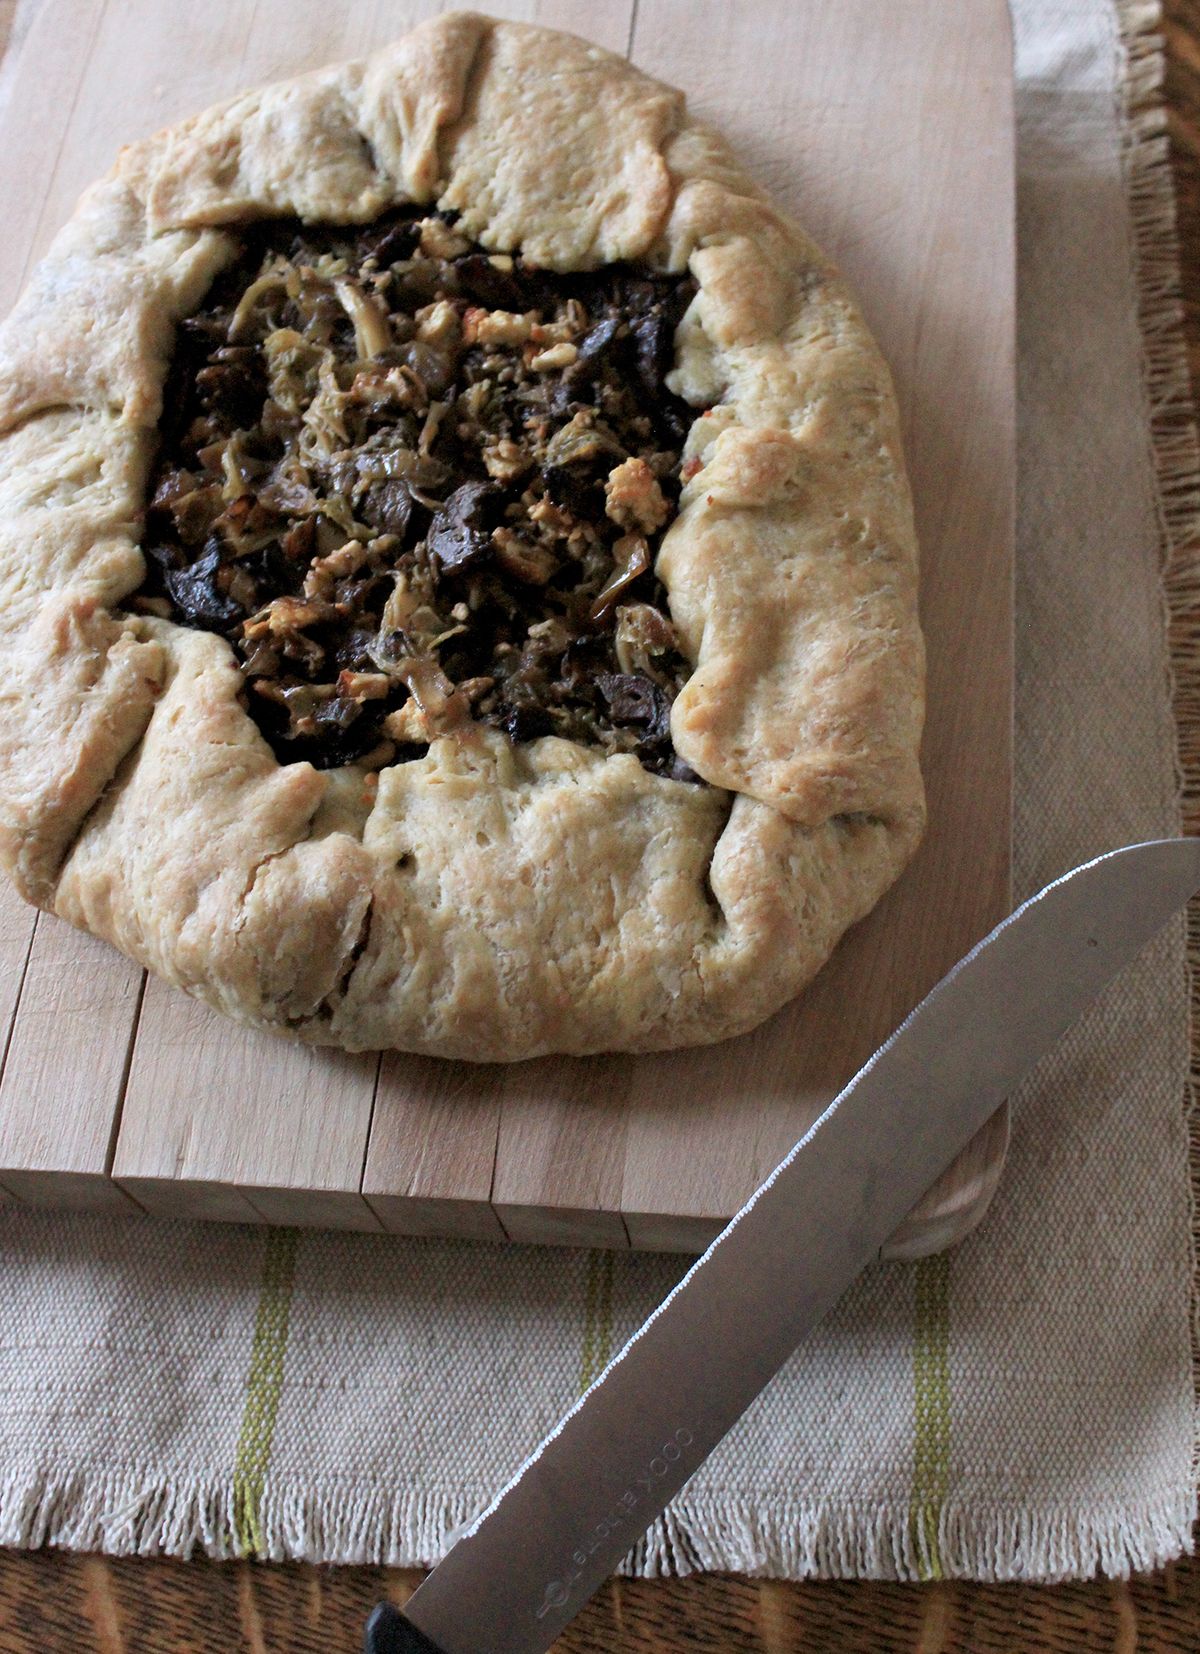 This rustic, vegetarian galette features caramelized cabbage, earthy mushrooms and salty queso fresco or feta, layered and wrapped in a rich, flaky crust. (Adriana Janovich)